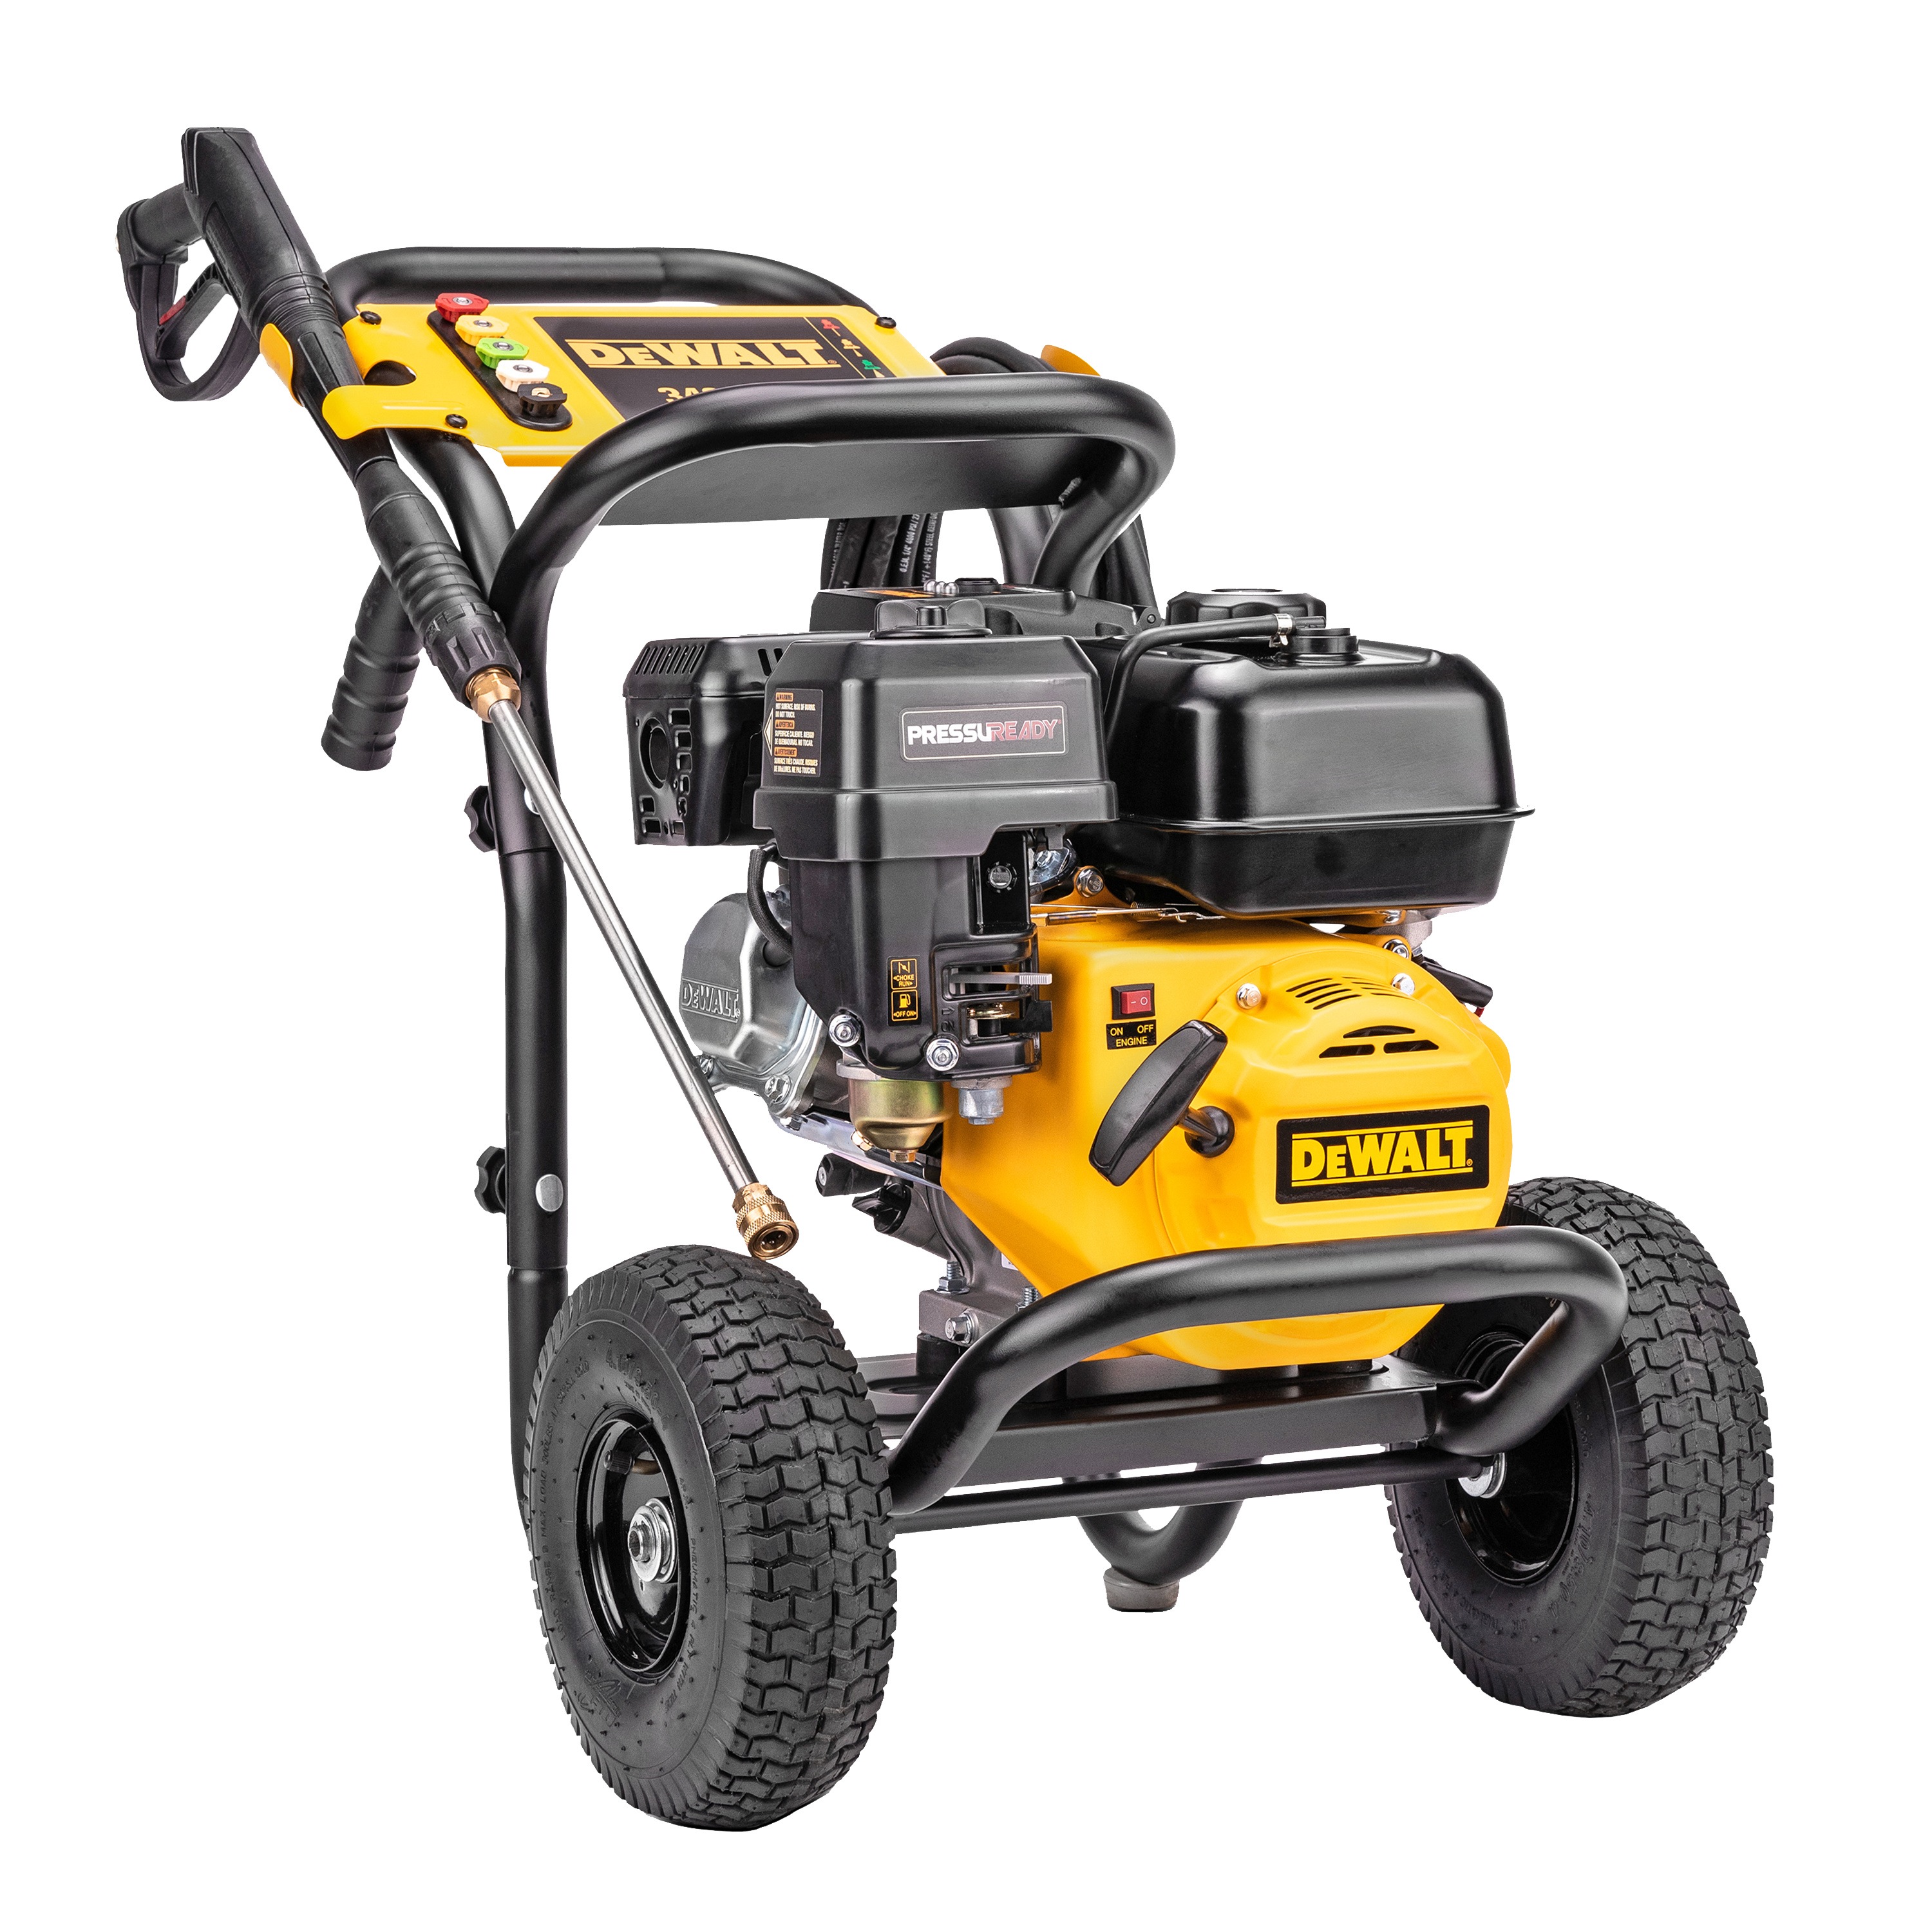 DEWALT - PressuReady 3400 PSI at 25 GPM GasPowered ColdWater Pressure Washer Tool Only - DXPW3400PRNB-S